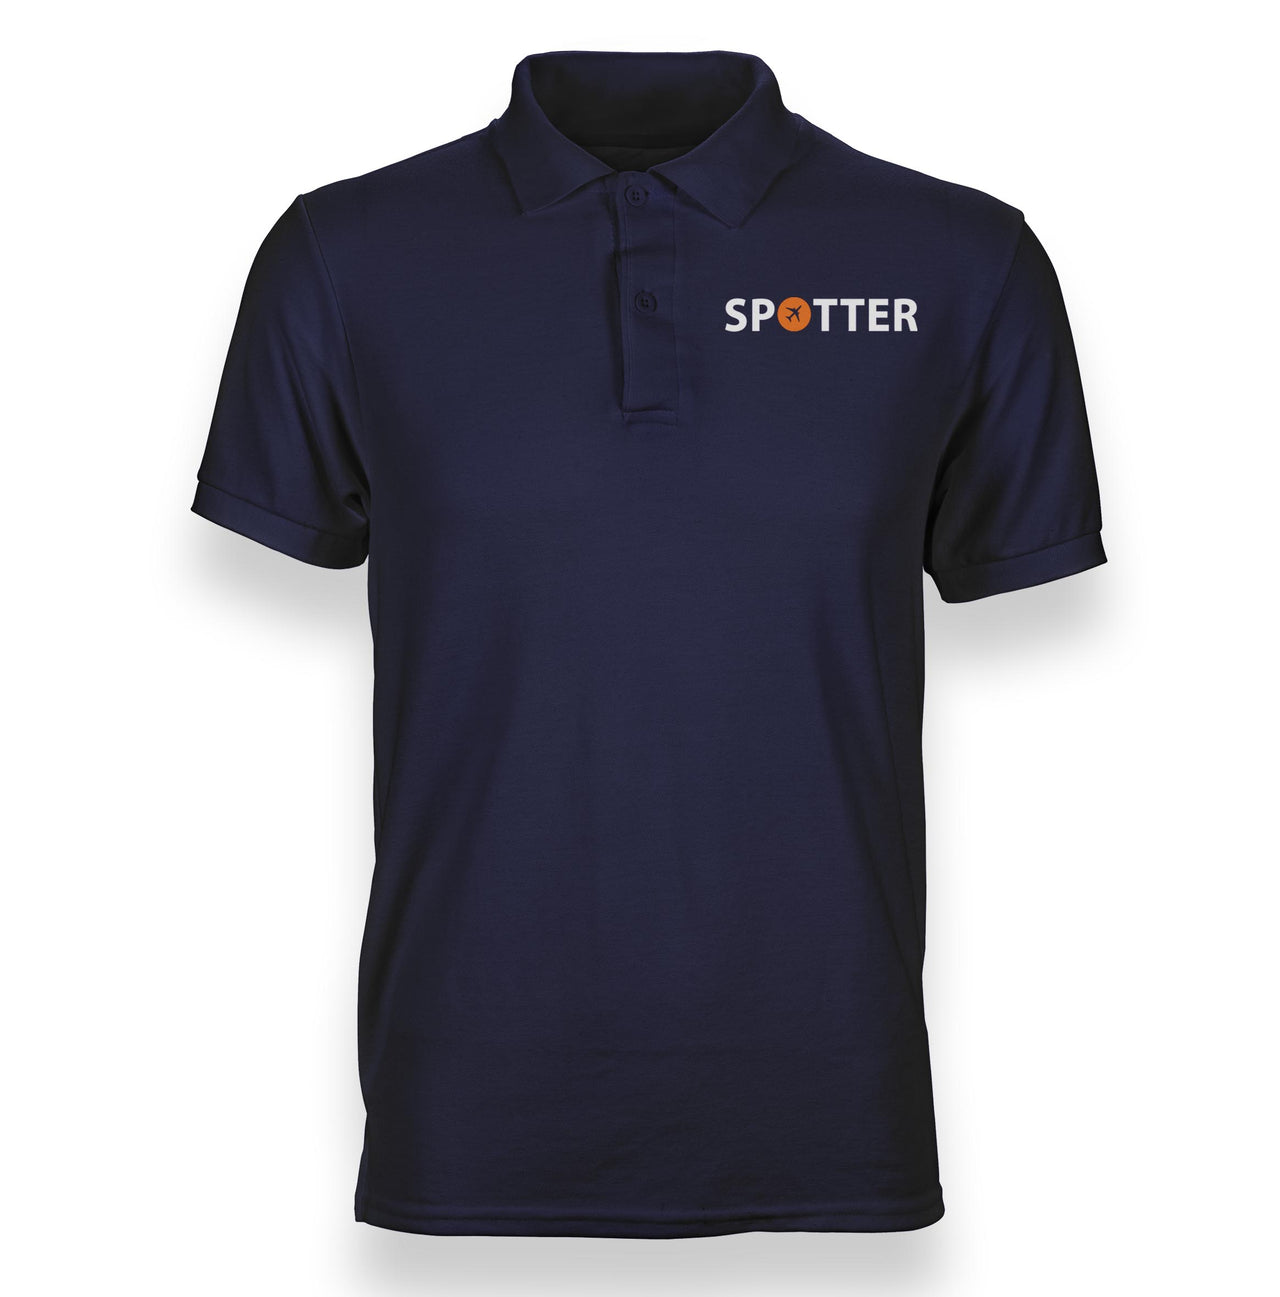 Spotter Designed Polo T-Shirts